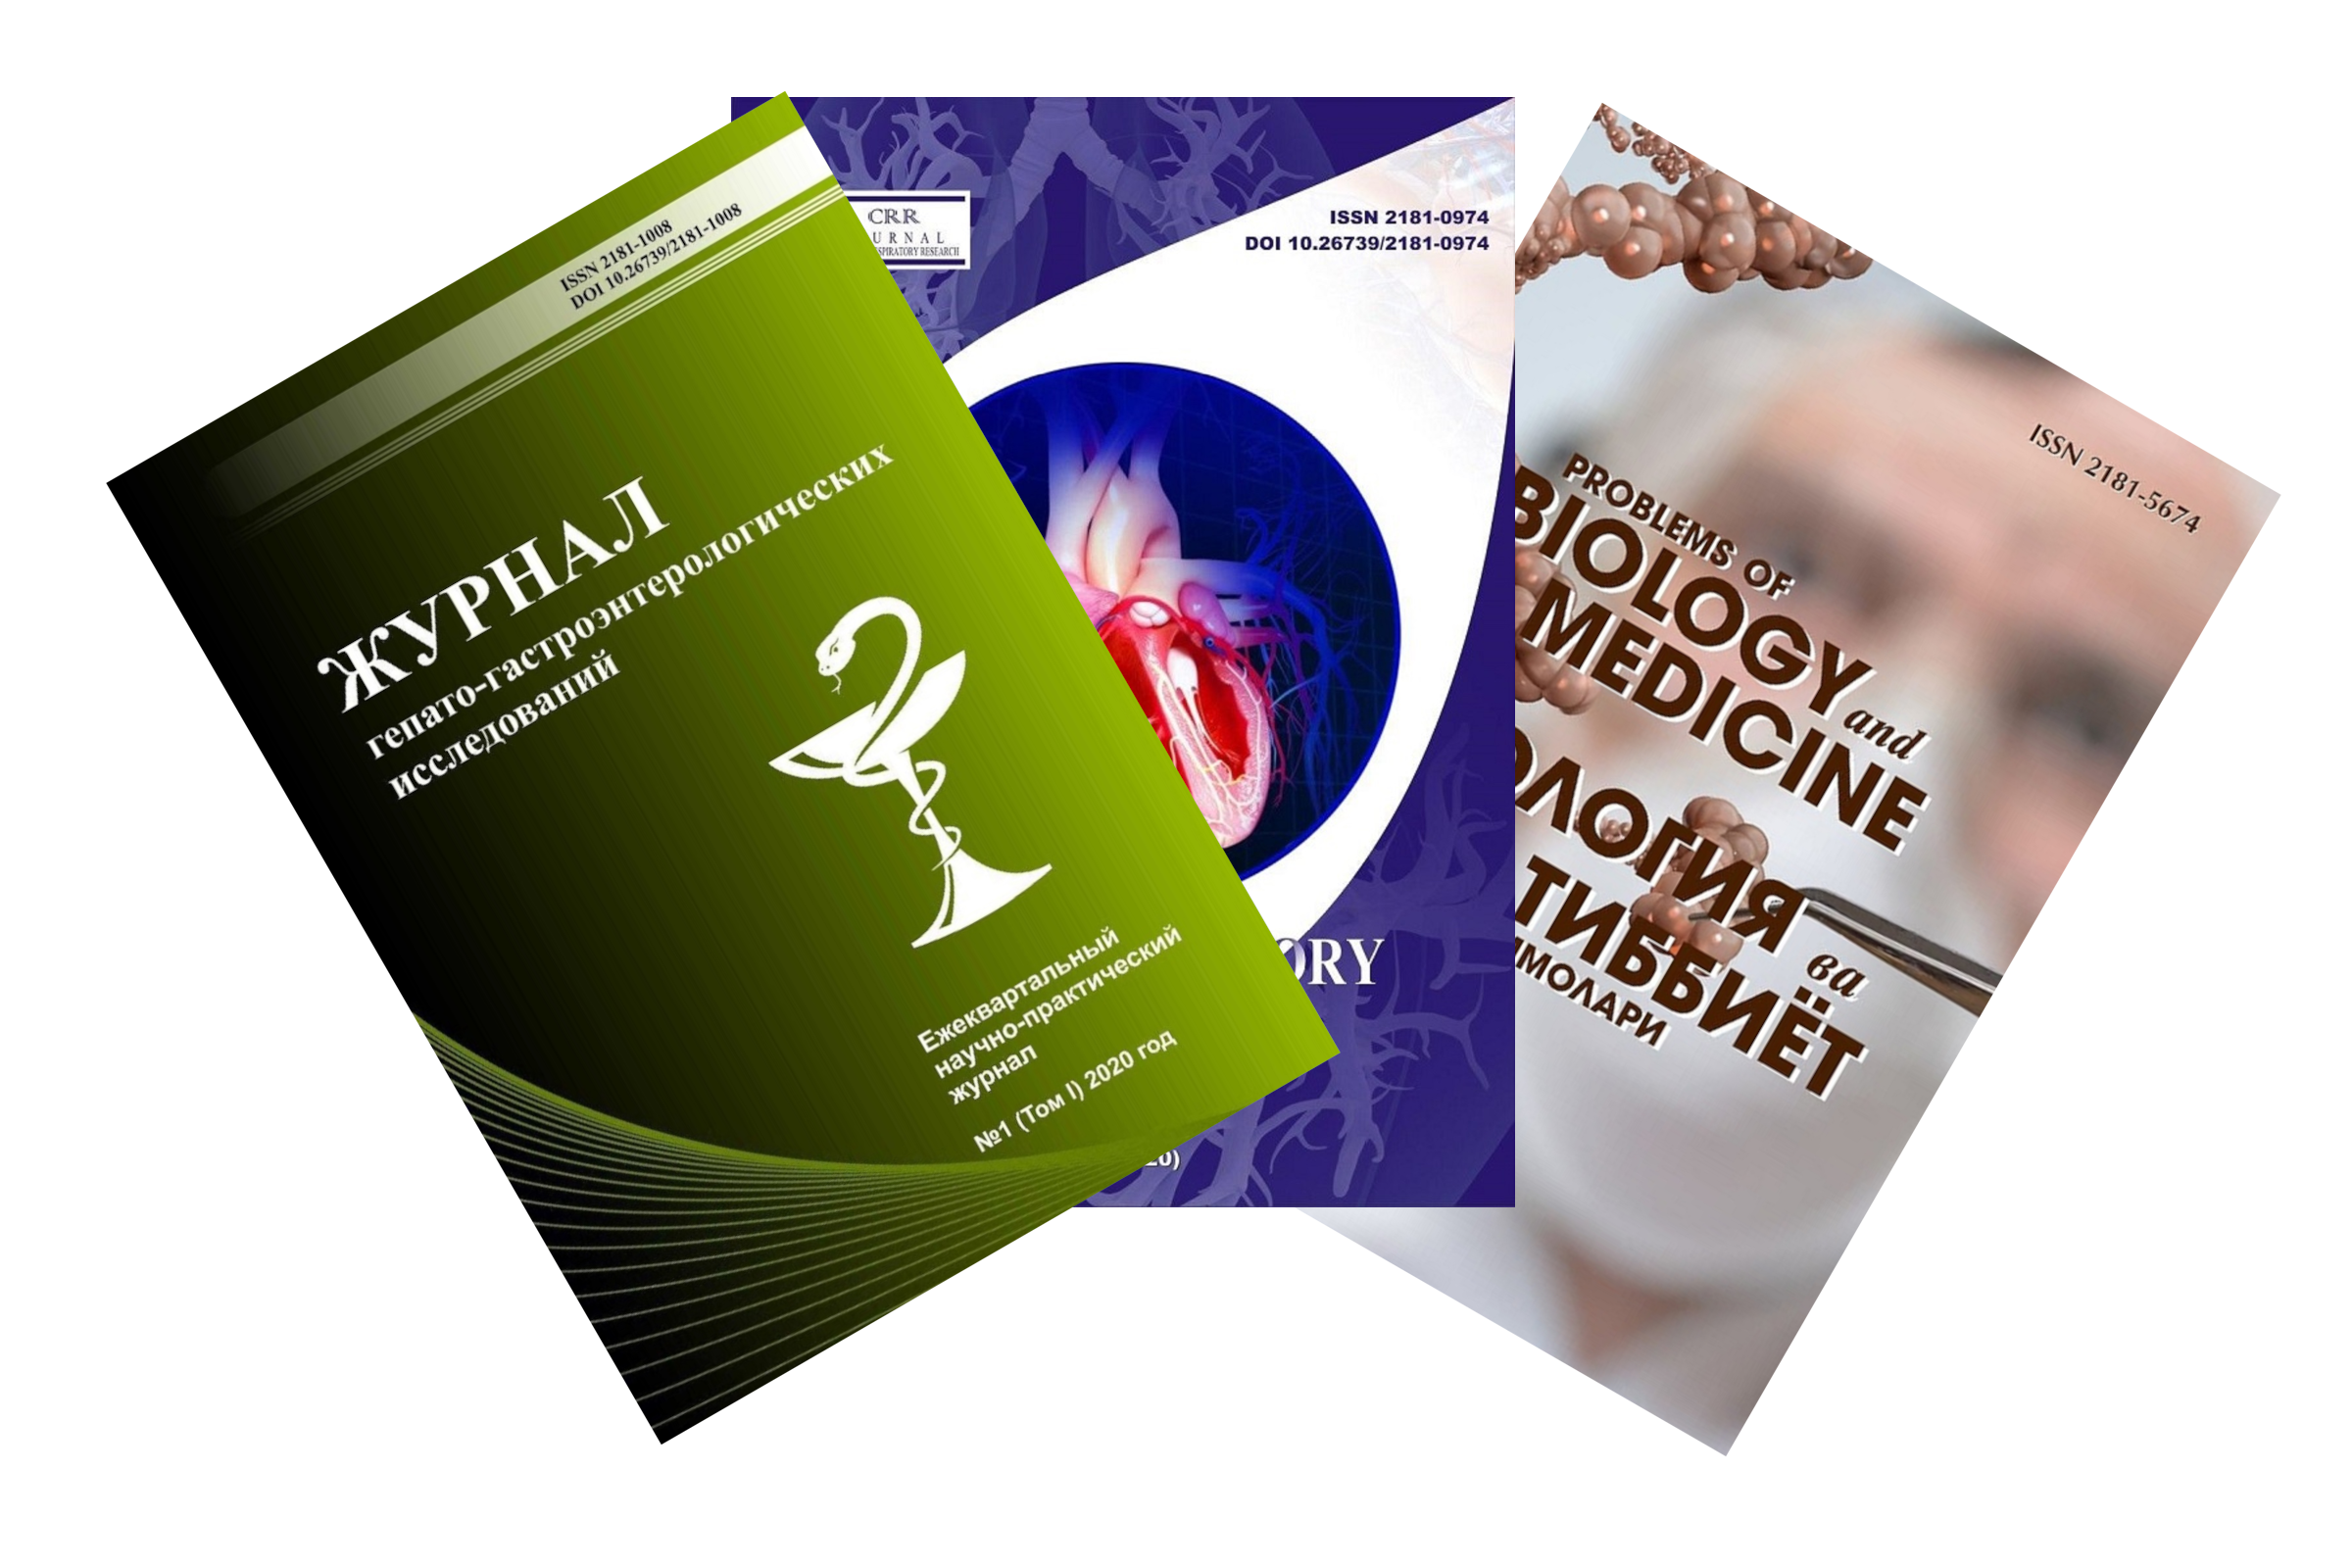 Website of the journal of the Samarkand State Medical University